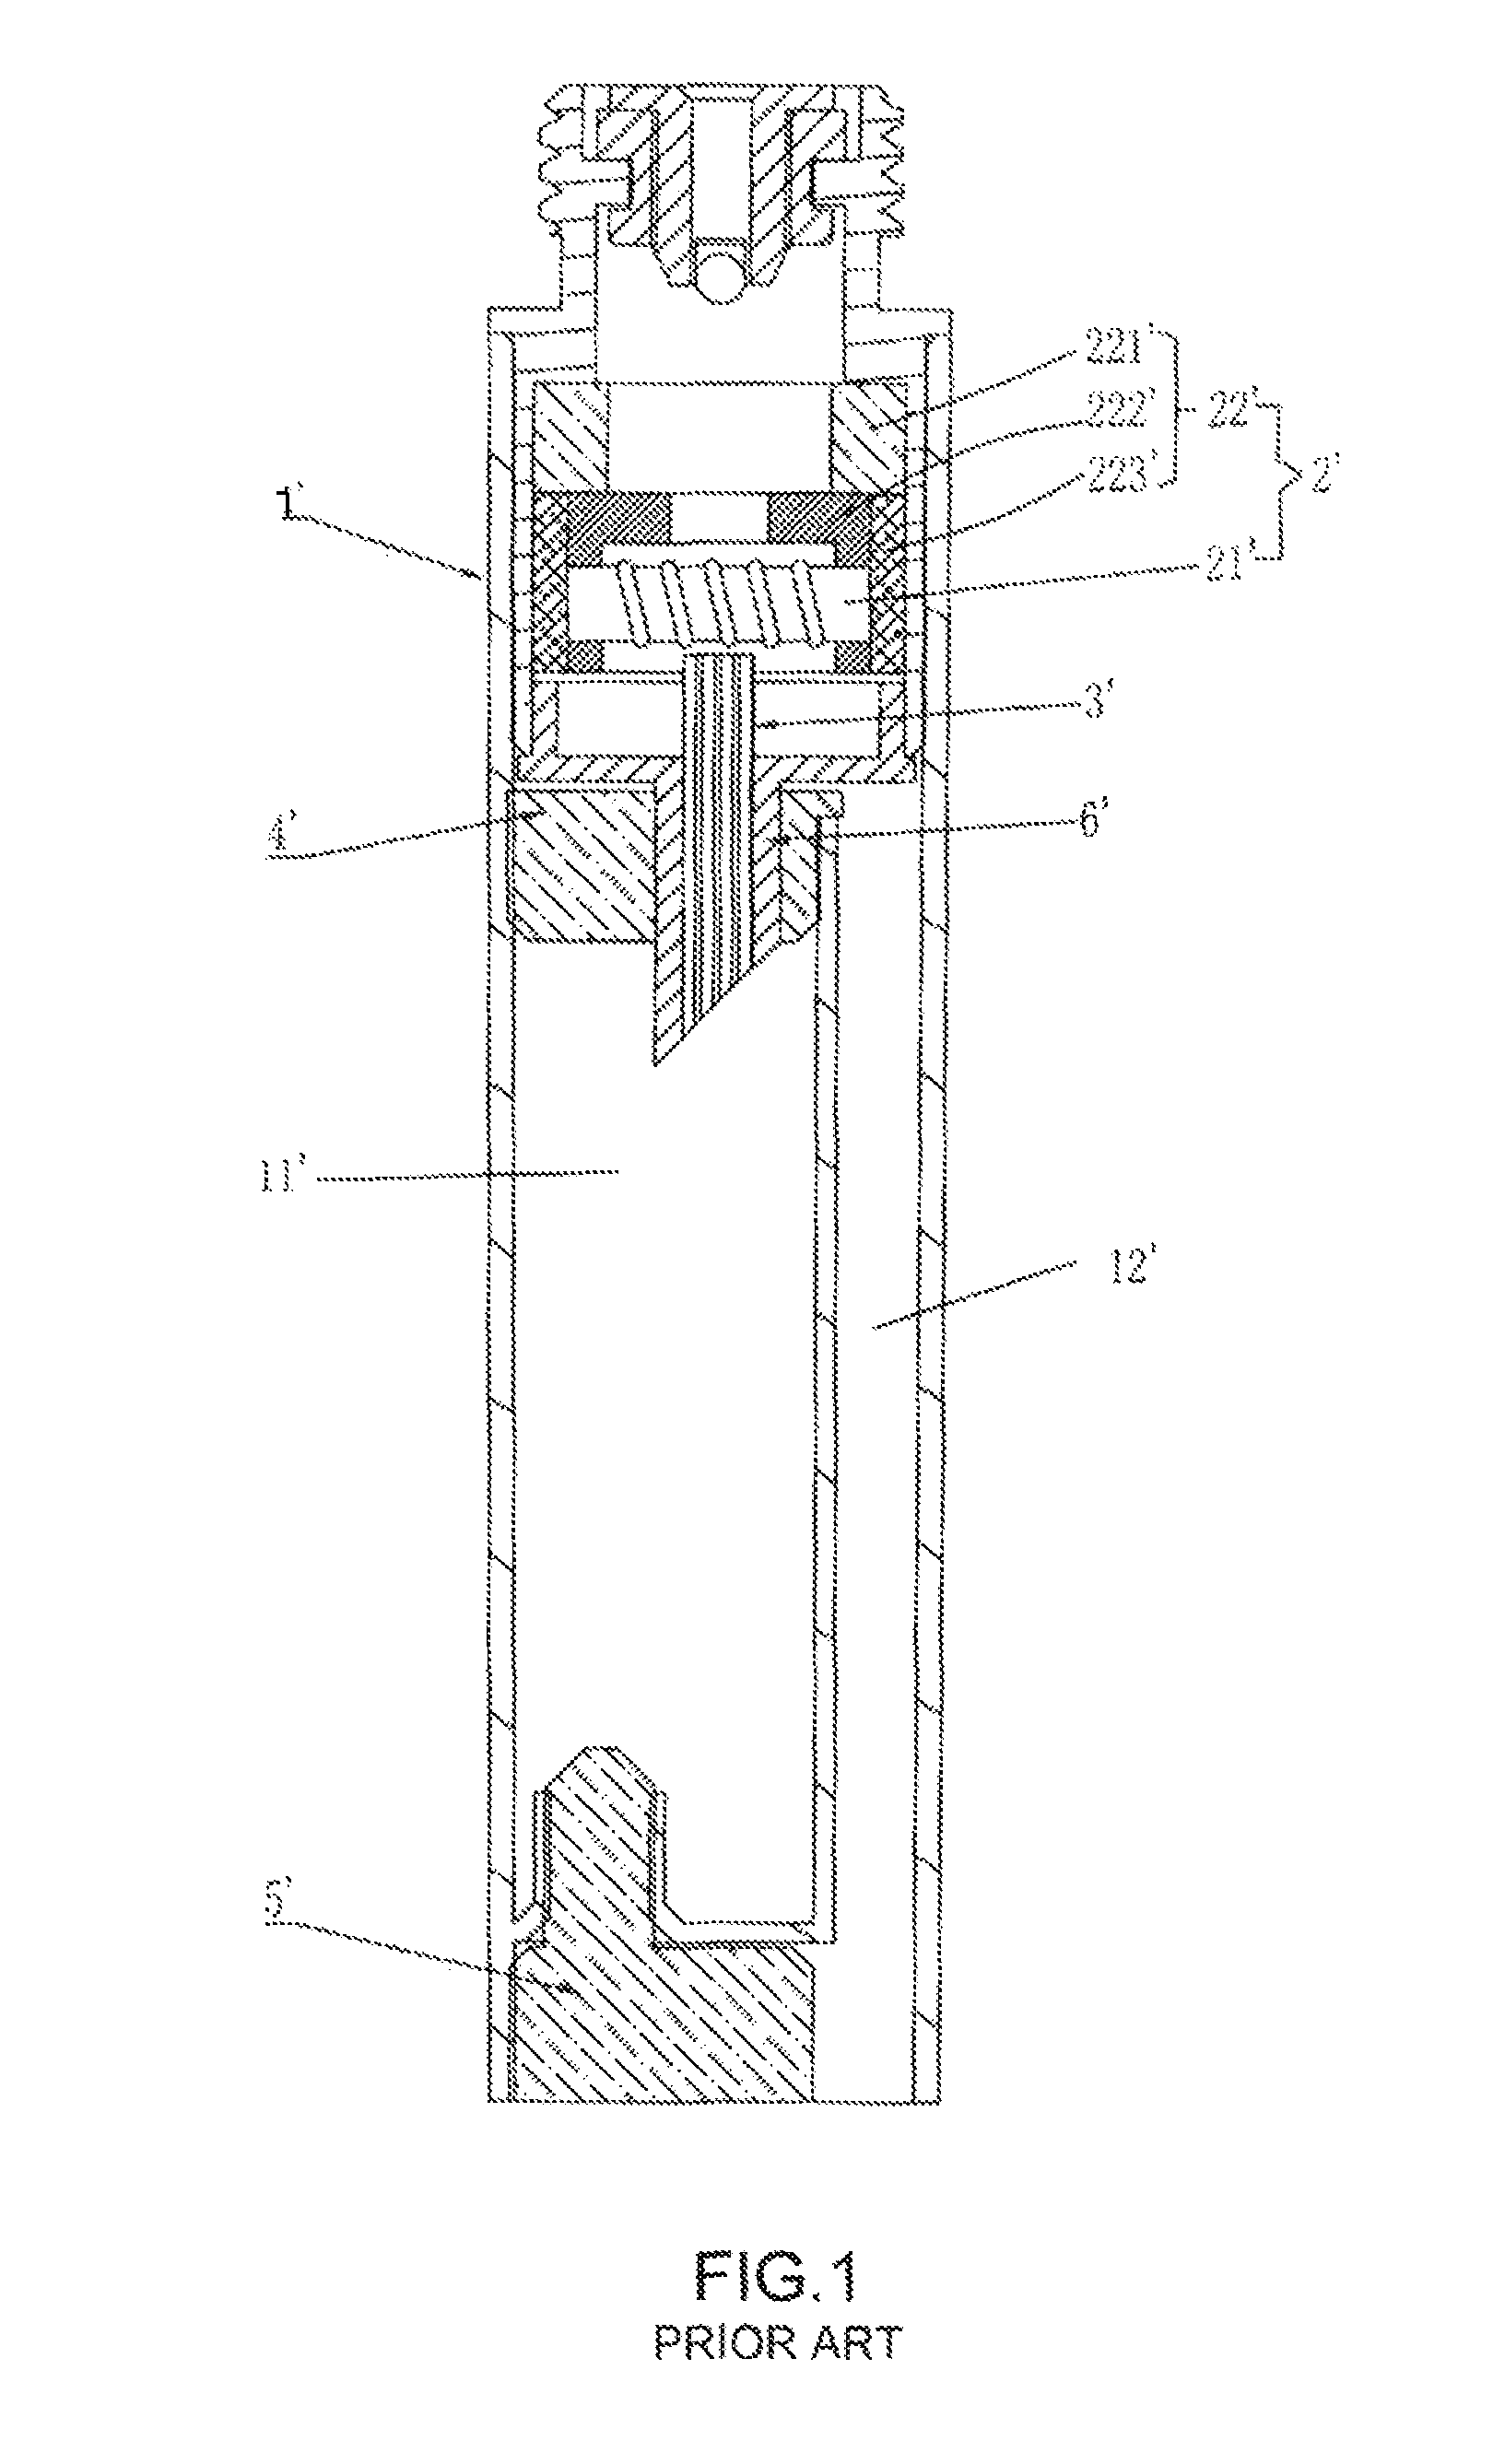 Mouthpiece device of electronic cigarette